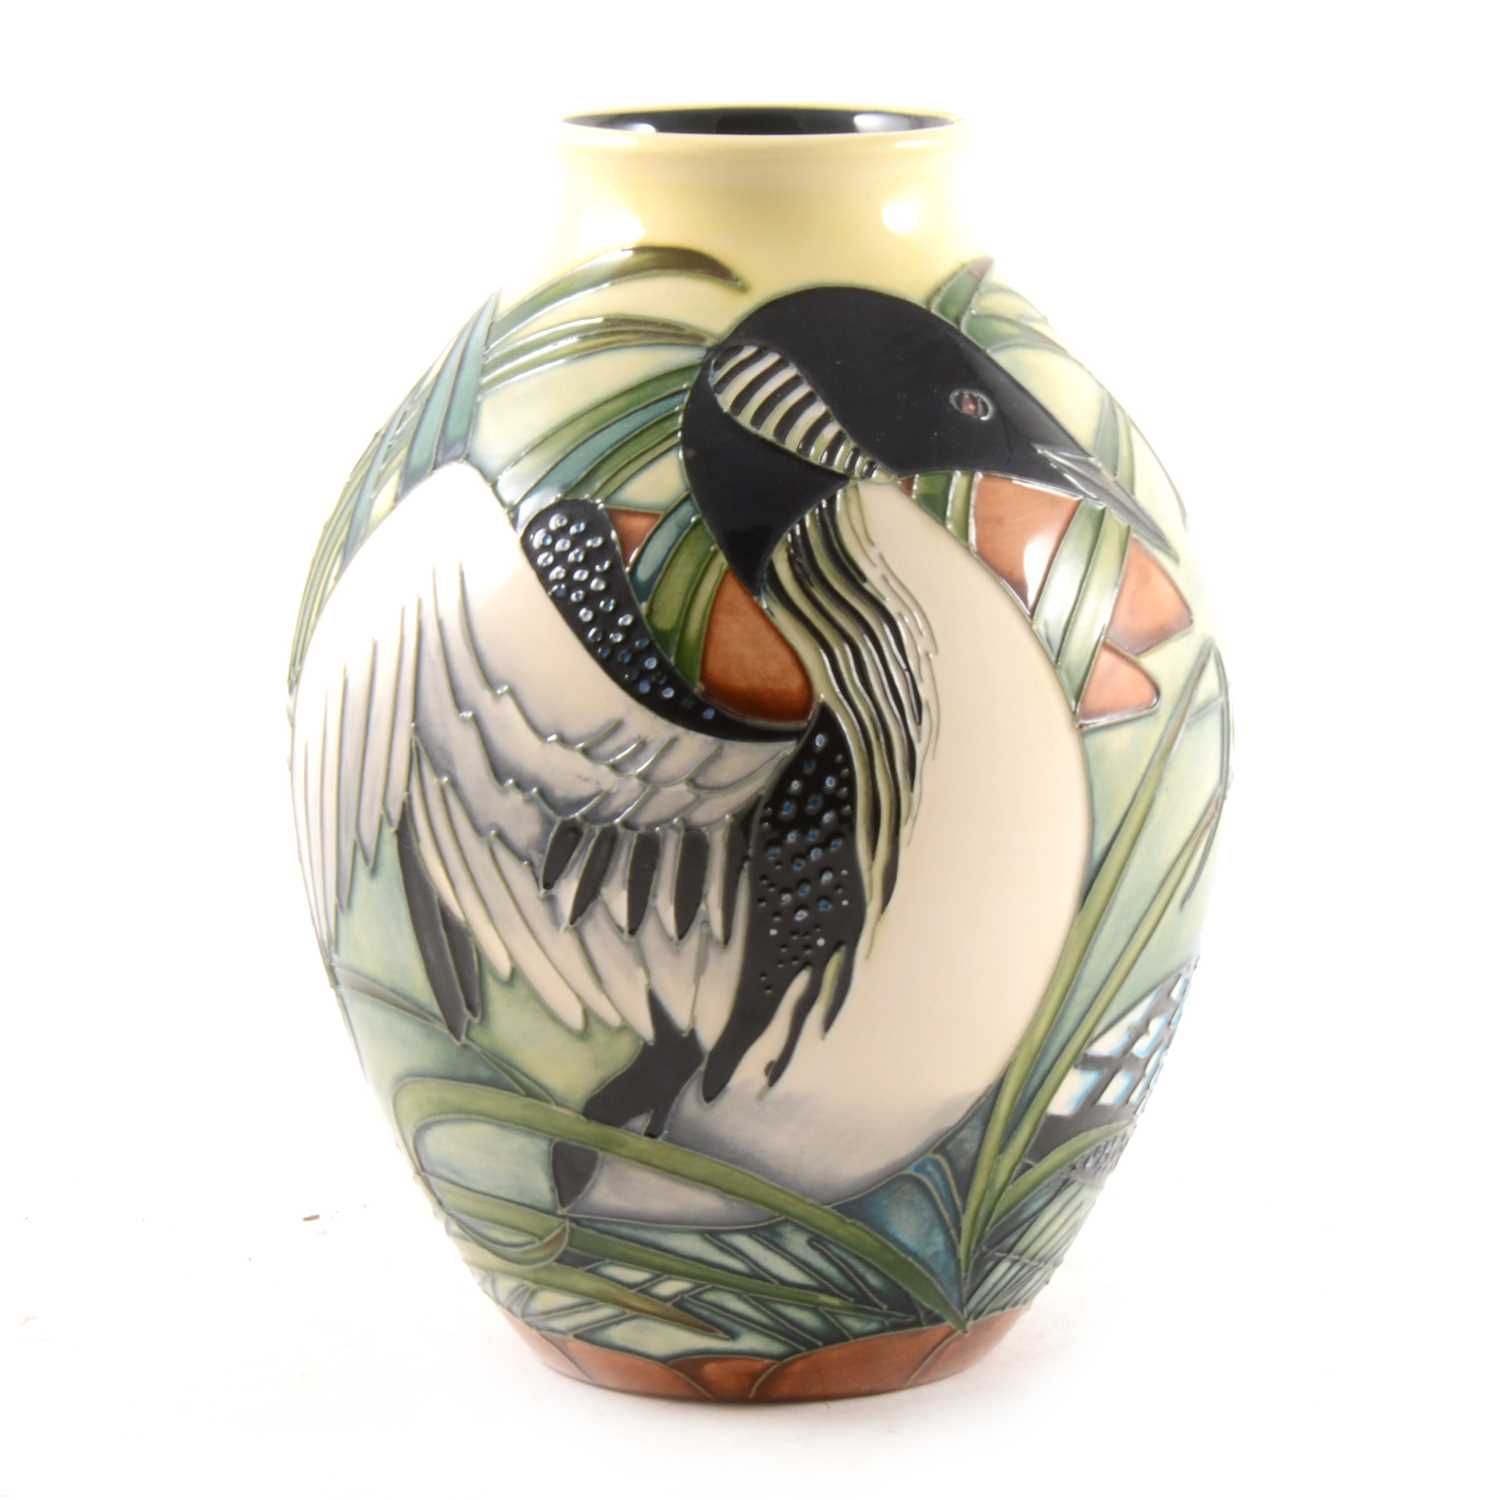 Lot 12 - A 'Toridon' vase designed by Philip Gibson for Moorcroft Pottery, 2005